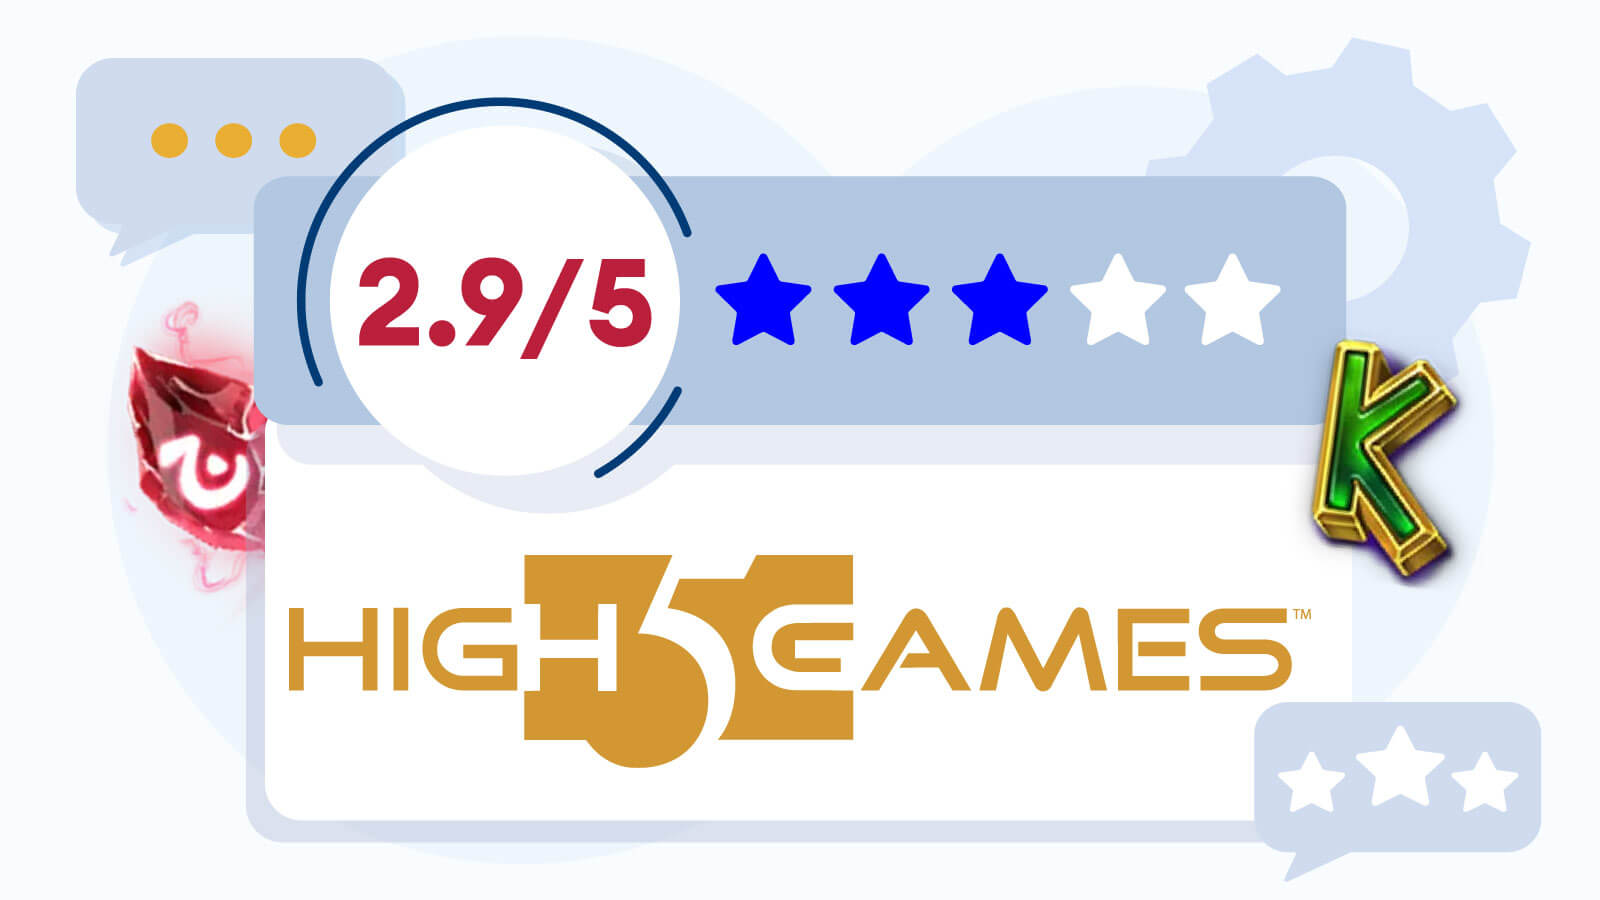 Our Review for High 5 Games Casino Software